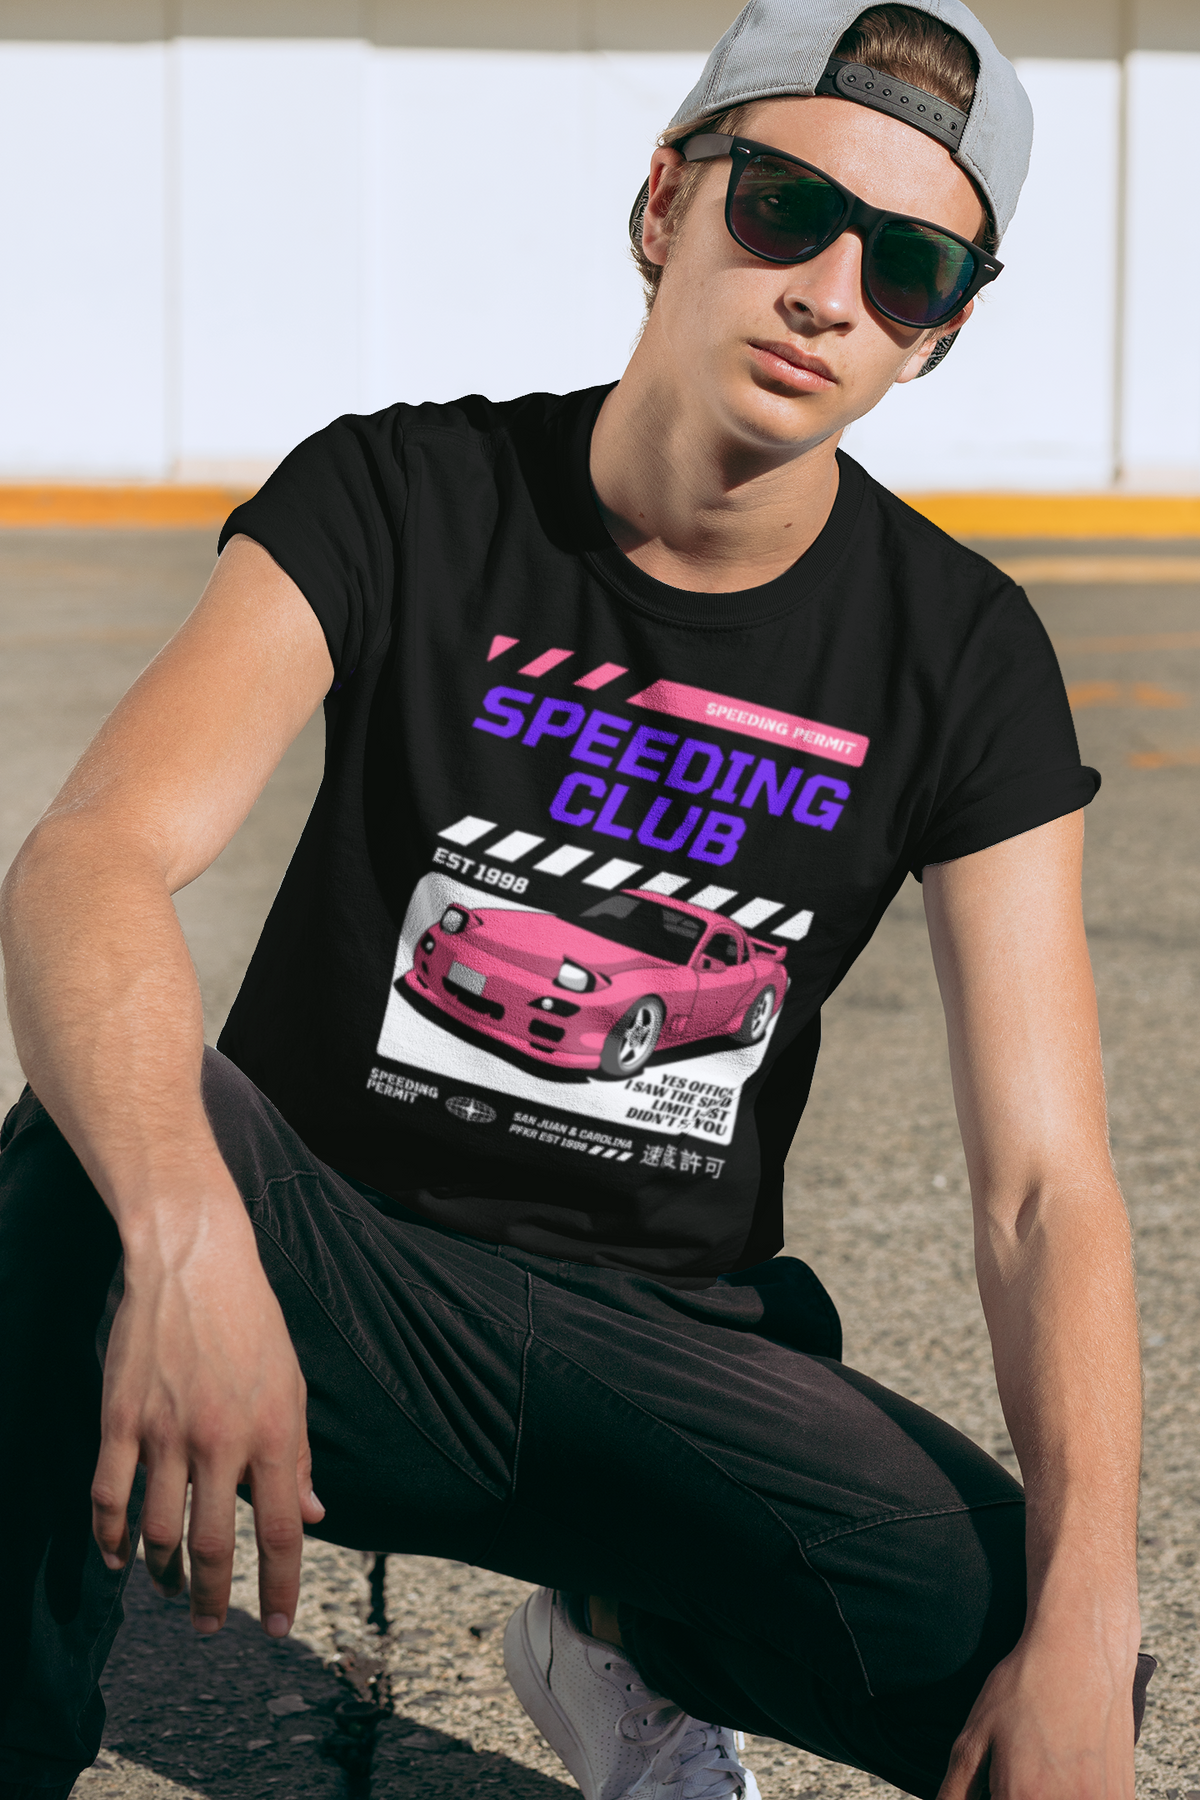 Japanese Car T-shirt, Funny Speeding tee, Speeding Ticket, Car Tee, Speeding Club, Yes Officer I saw the Speed Limit I Just didn't see you